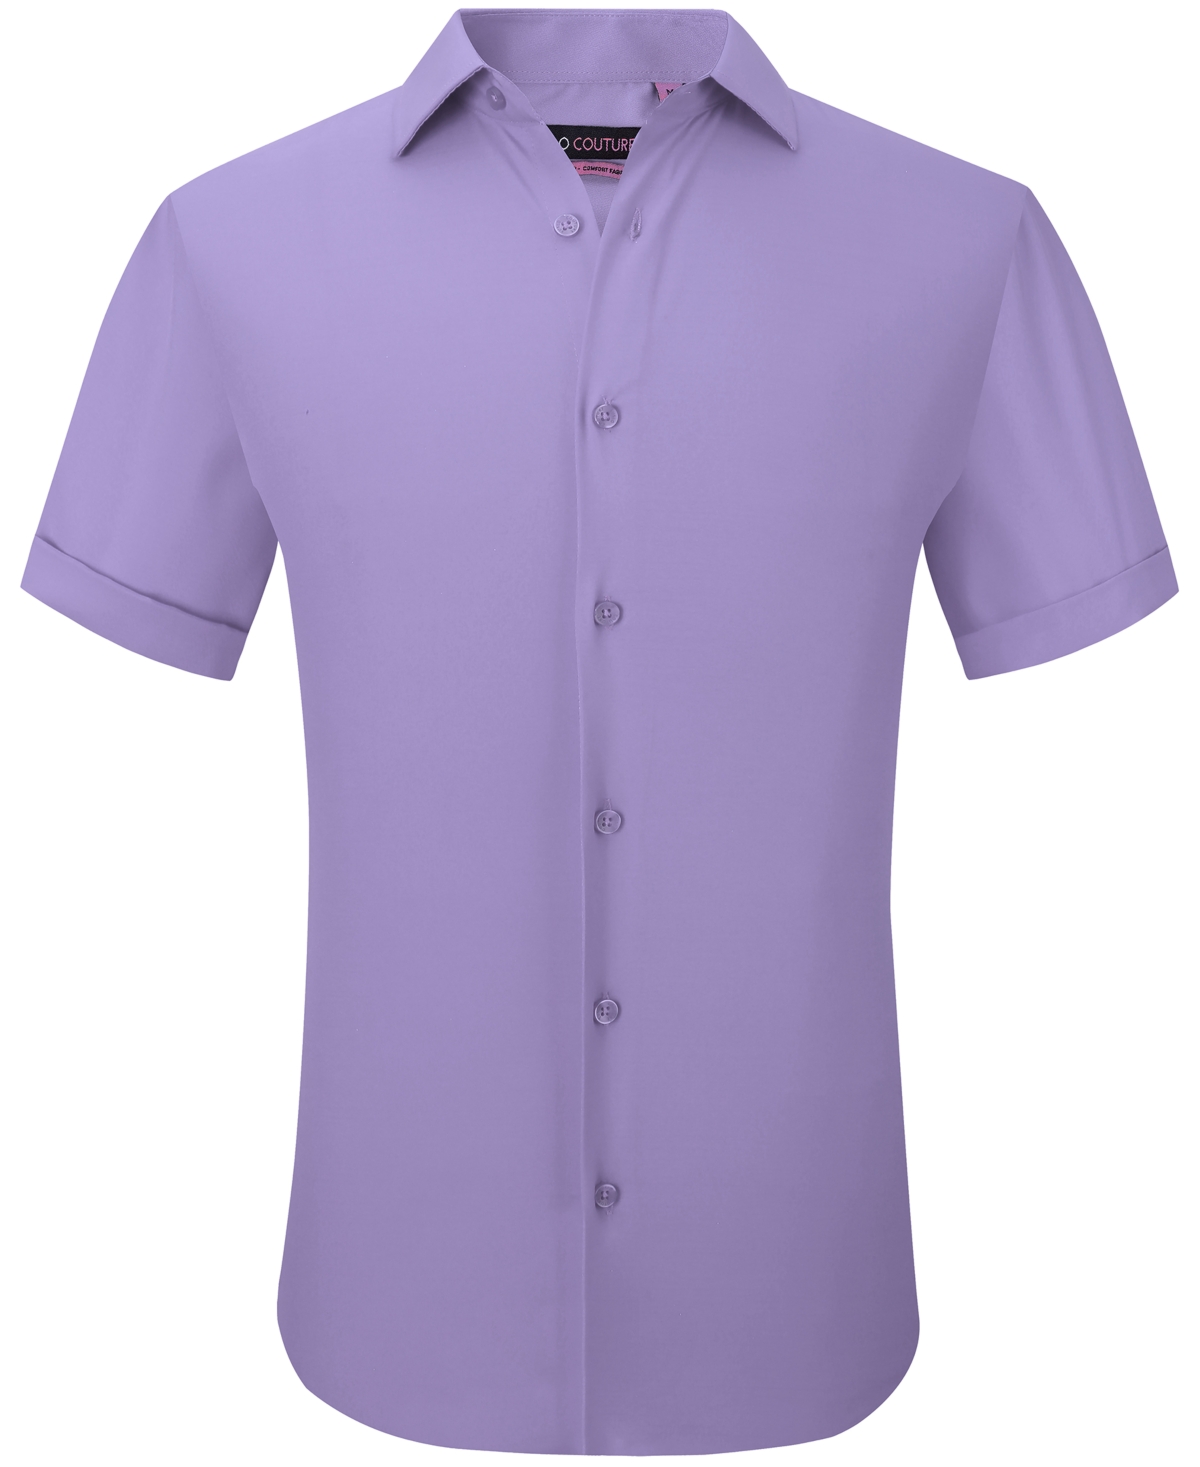 Shop Suslo Couture Men's Slim Fit Performance Short Sleeves Solid Button Down Shirt In Light Purple